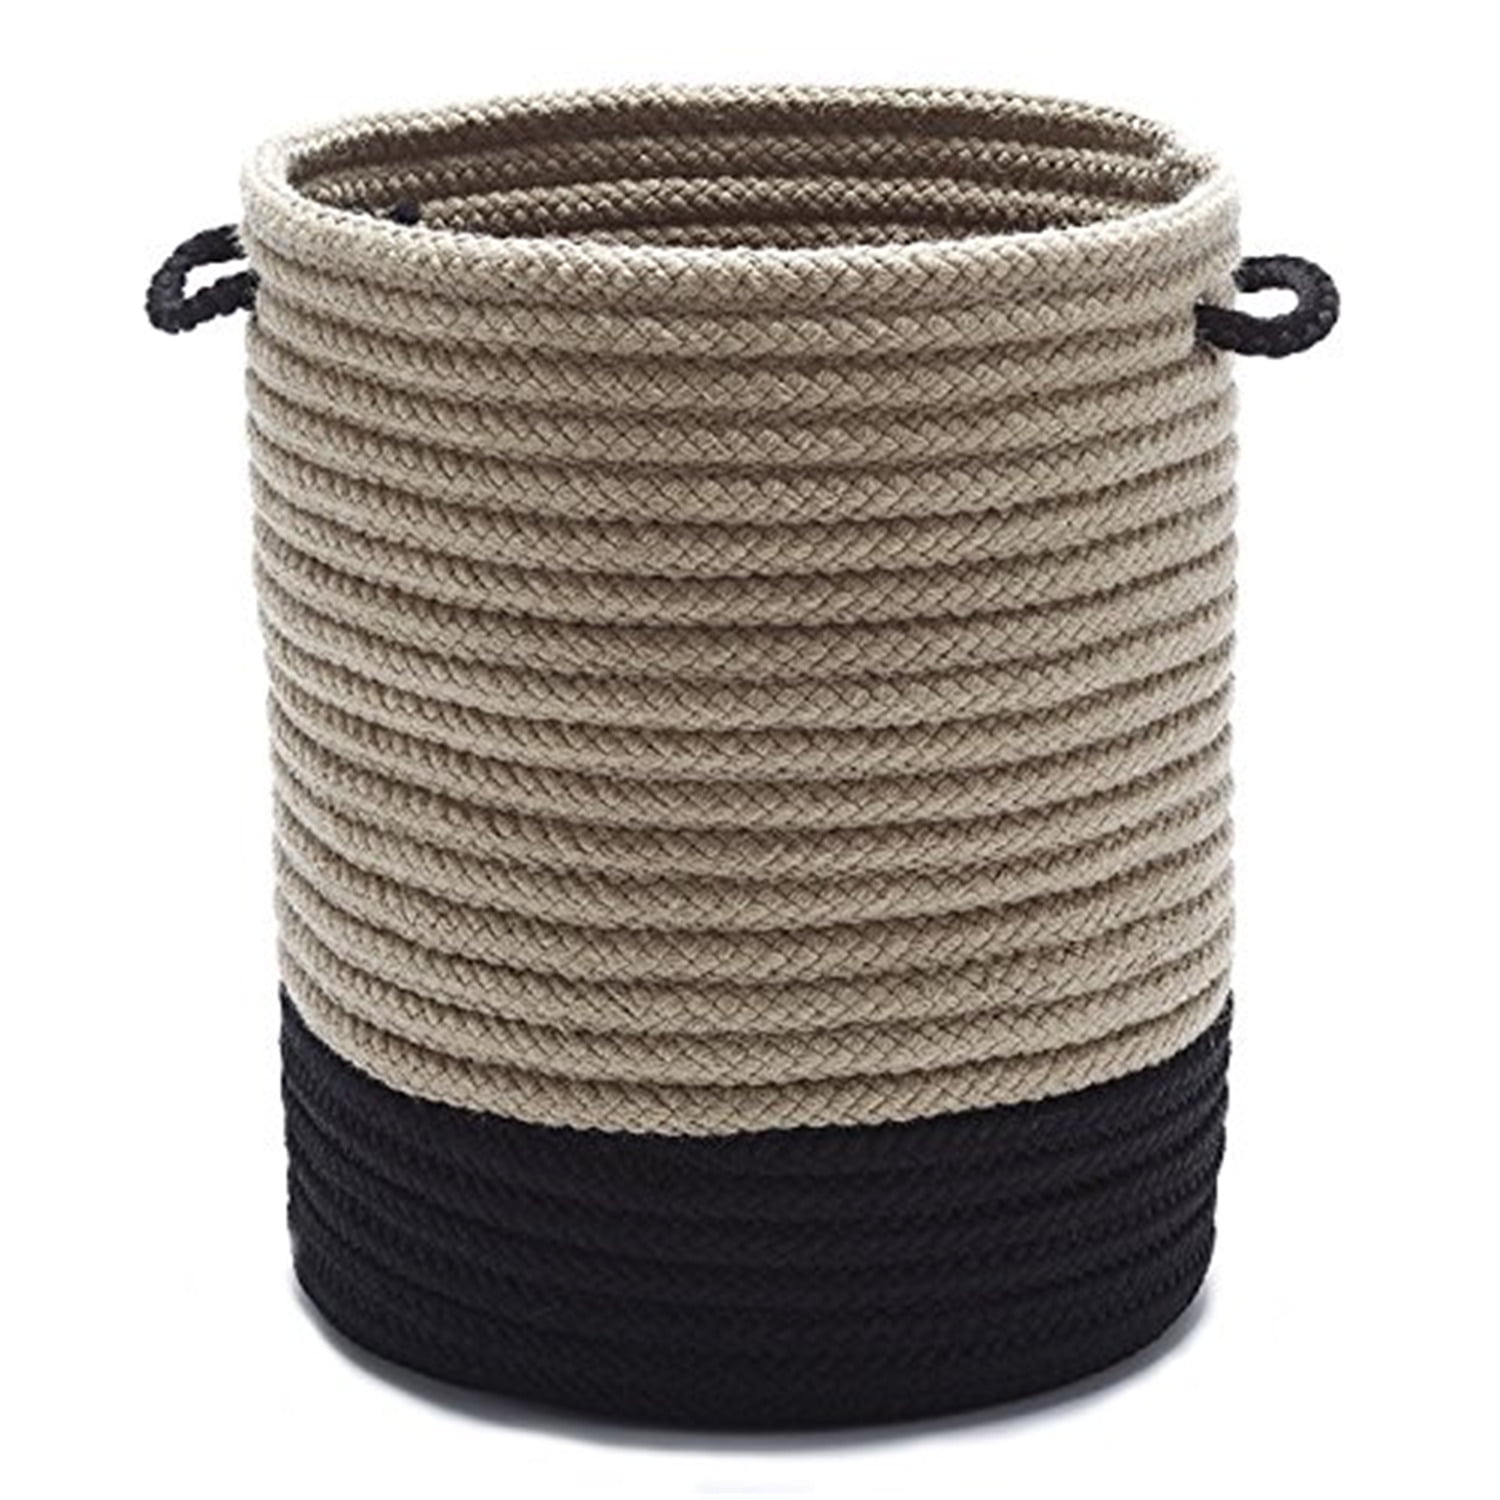 Picture of Colonial Mills IN01A012X012 12 x 12 x 12 in. Marina Round Basket, Black & N150